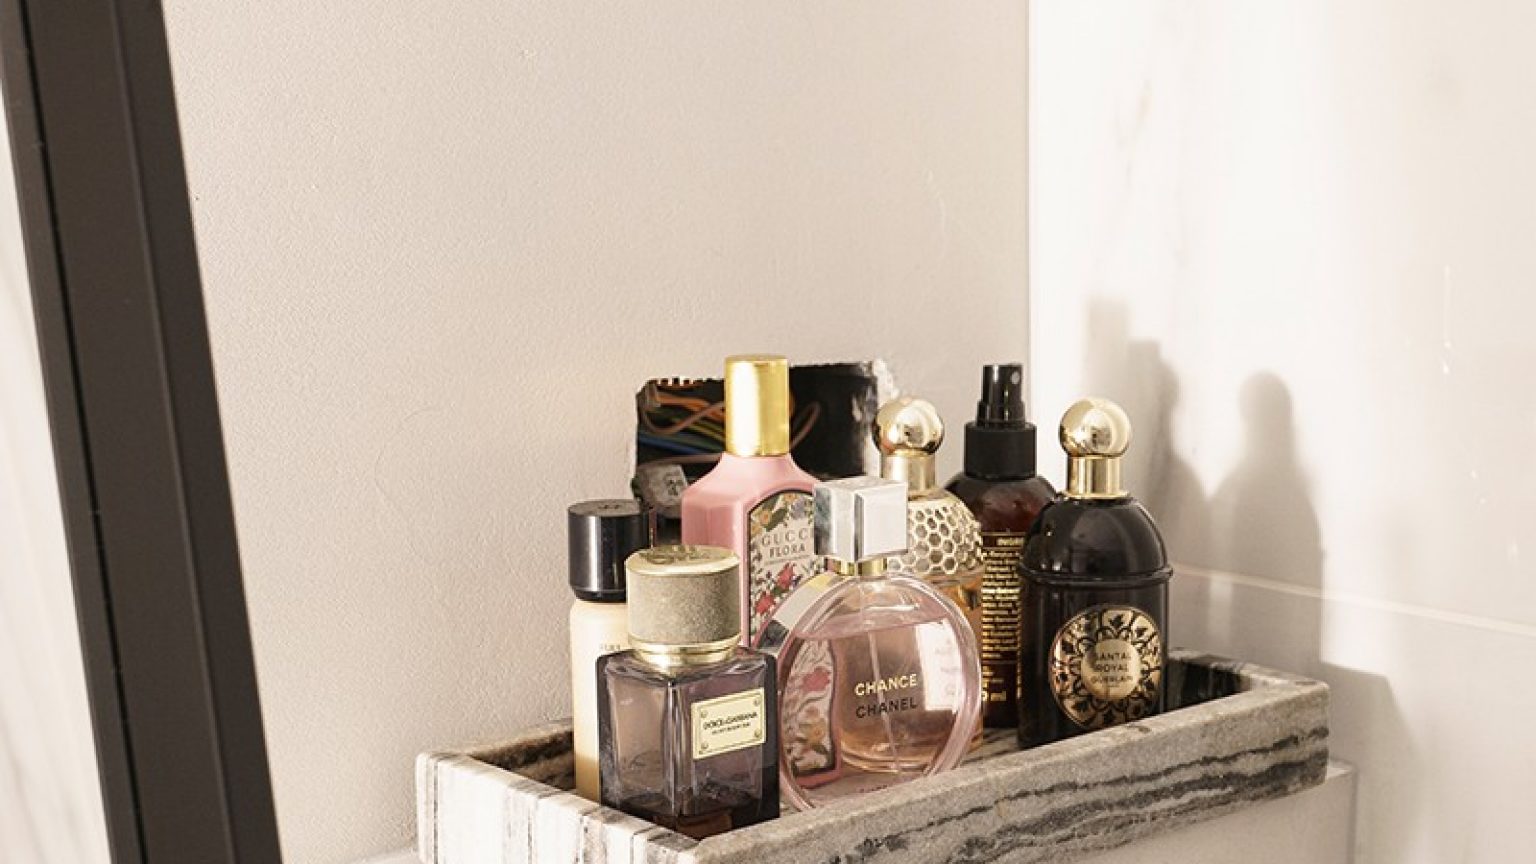 On a shelf in the bathroom is a tray with different perfume bottles.